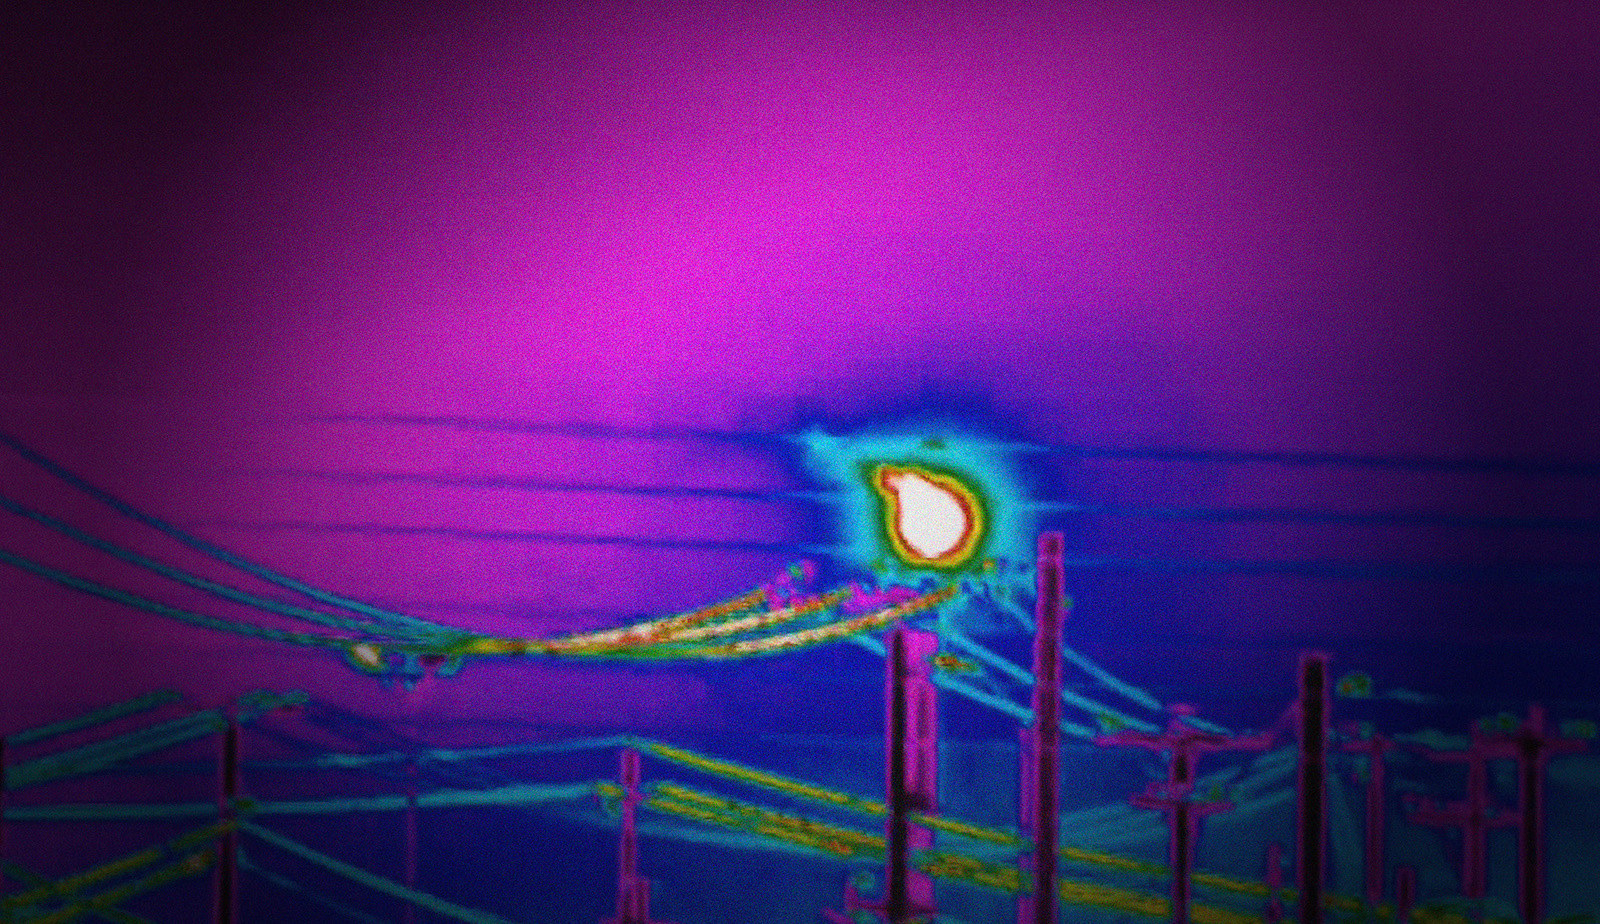 Fugitive emissions captured by an infrared camera at the Elk Hills Power Plant in Kern County, California.